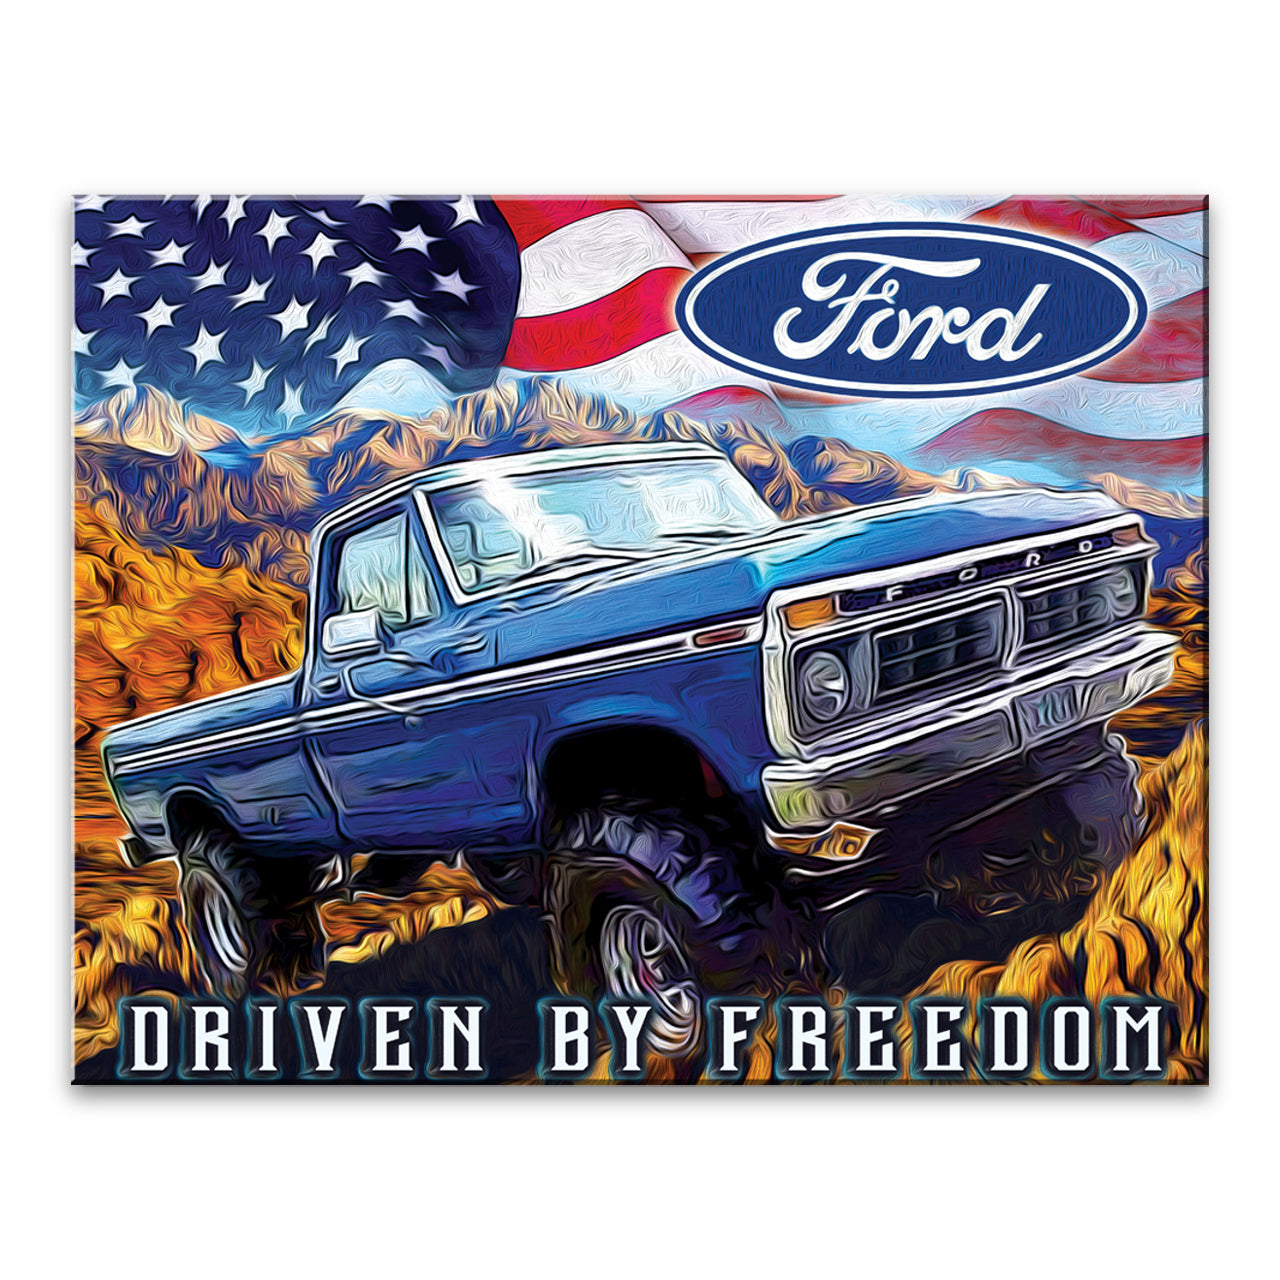 Ford Freedom Truck Sign